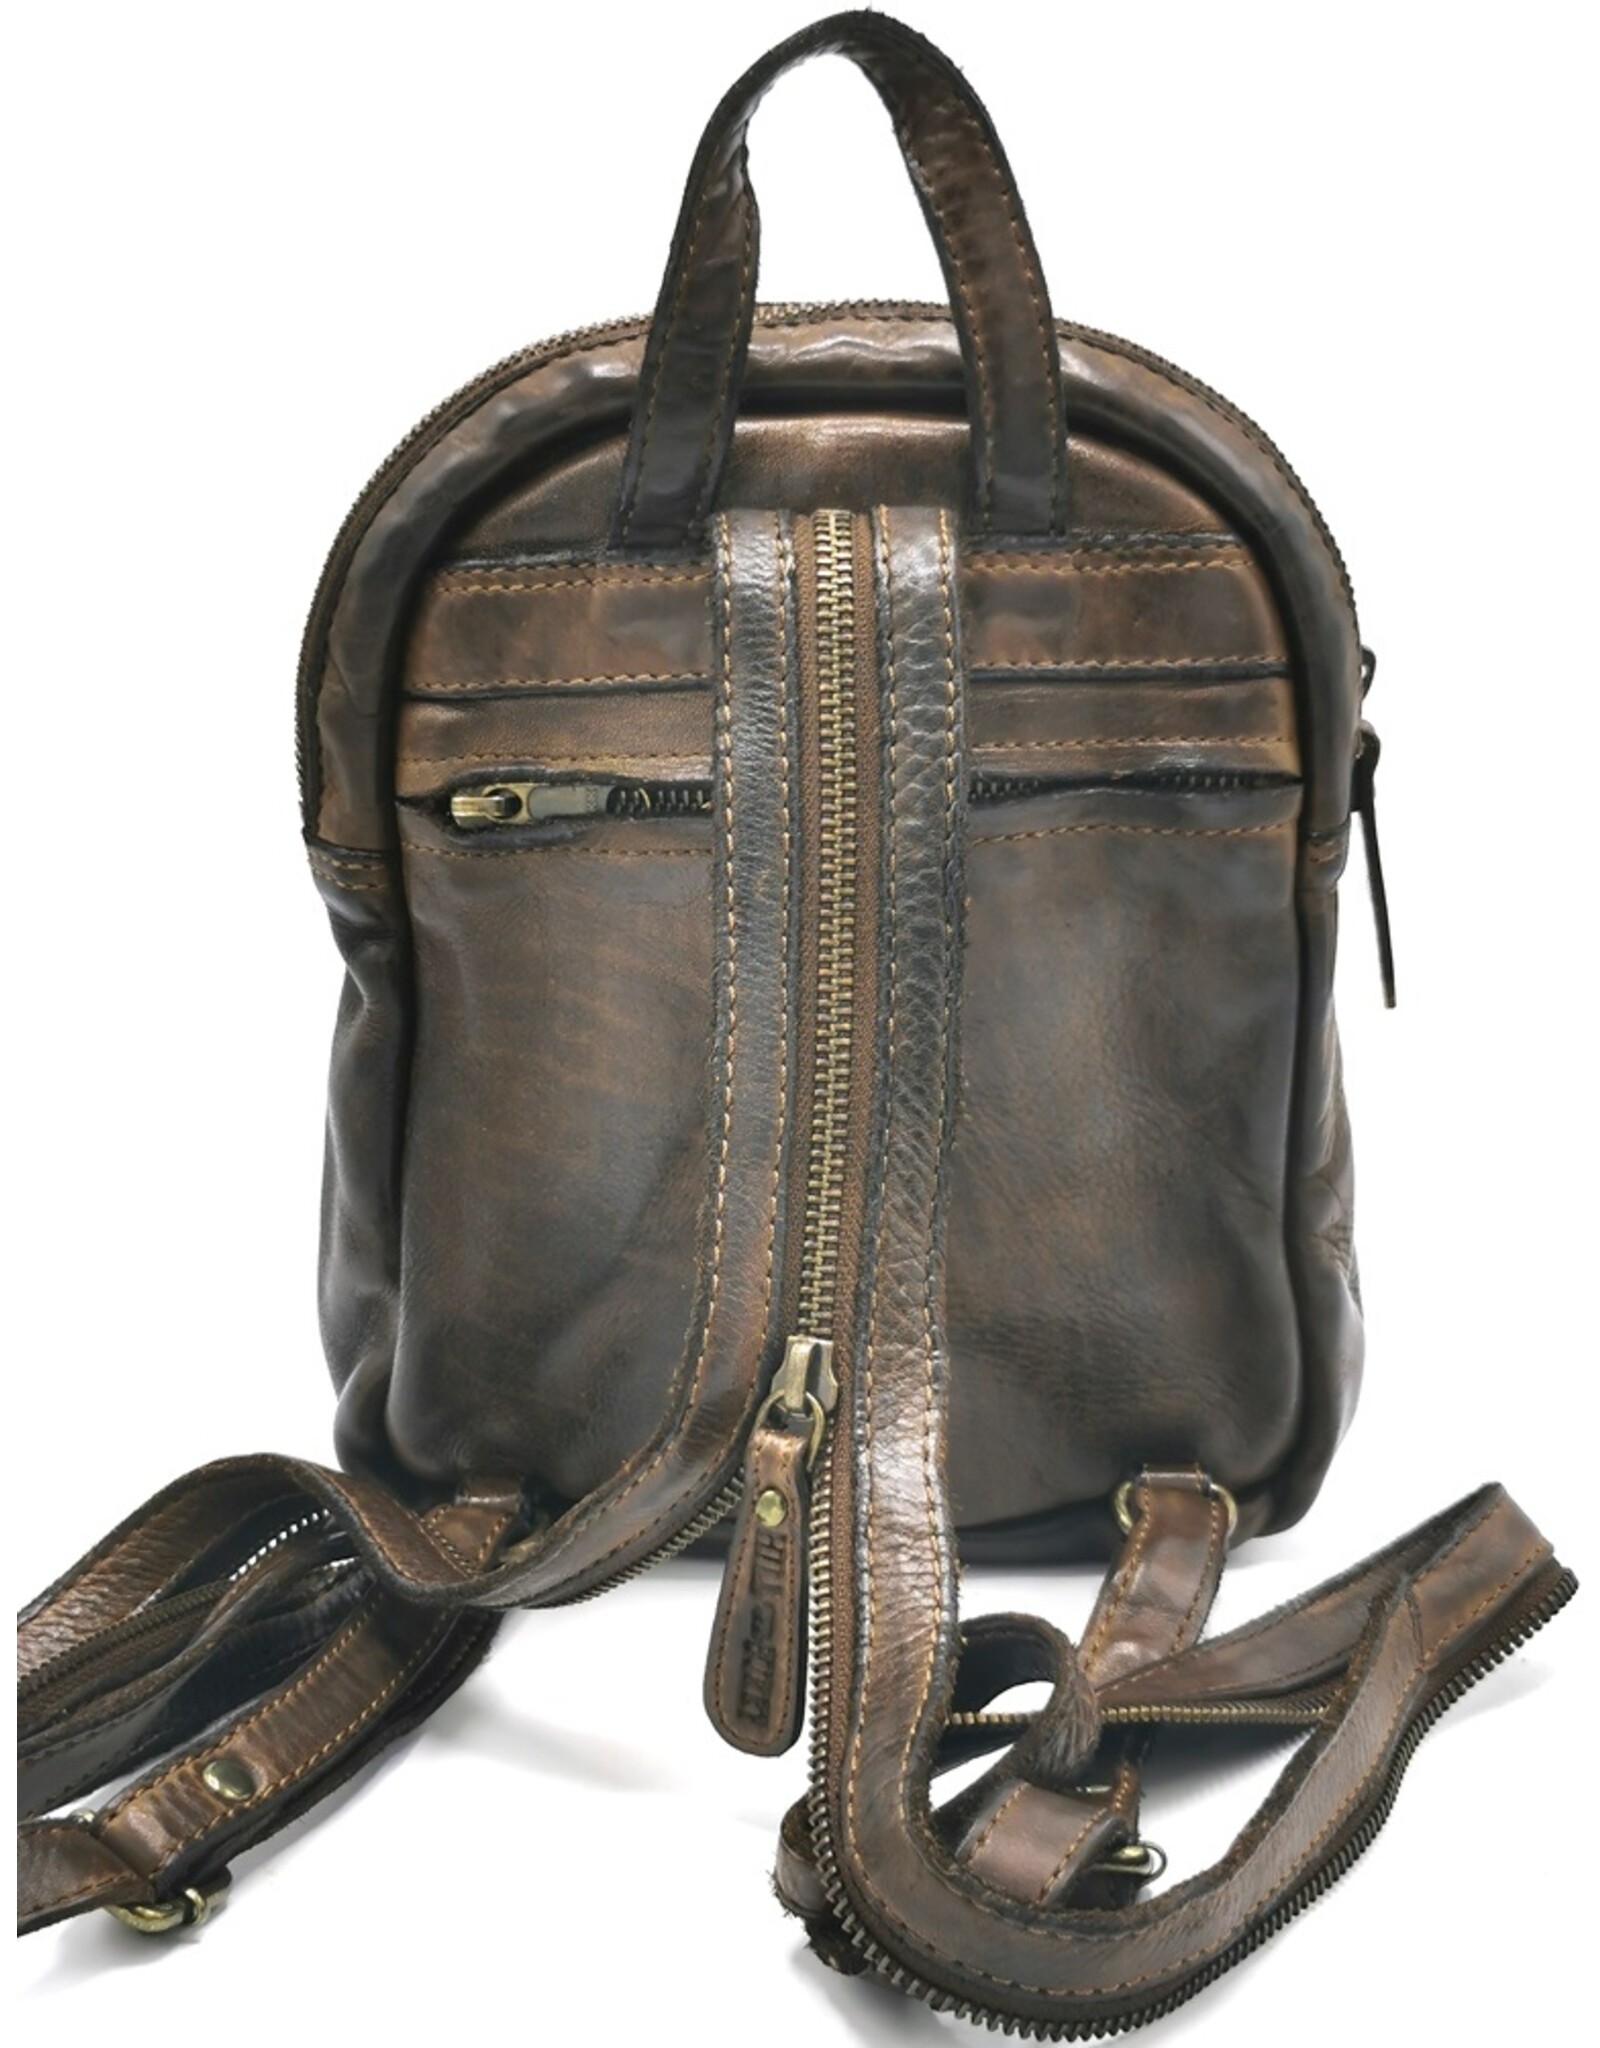 HillBurry Leather backpacks Leather shoppers - HillBurry Mini Backpack Washed Leather Vintage look brown